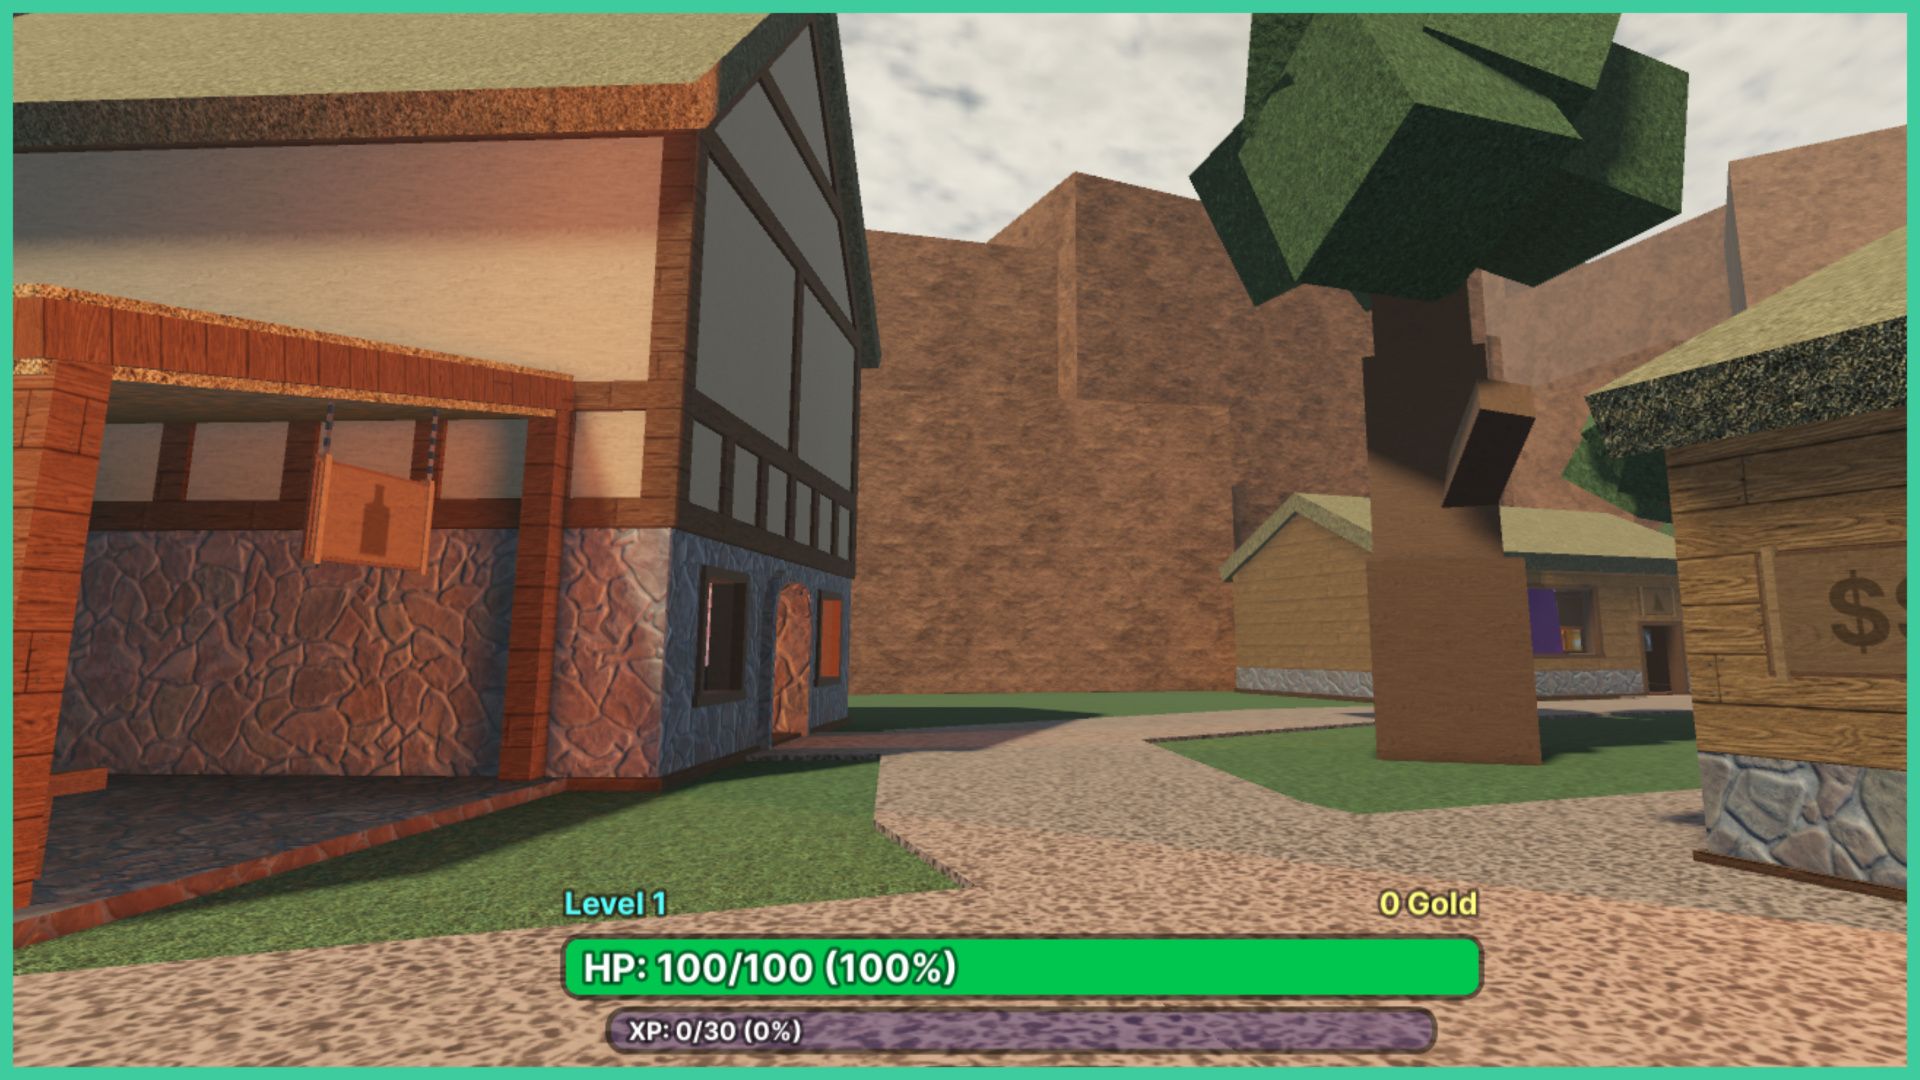 feature image for our how to get periastrons in periastron stars rpg guide, the screenshot is from the spawn point at the start of the game of 3 buildings within the town, dirt hills in the background and a tree, the 3 buildings look to be shops, with one having a sign with a bottle and the other having 2 dollar signs